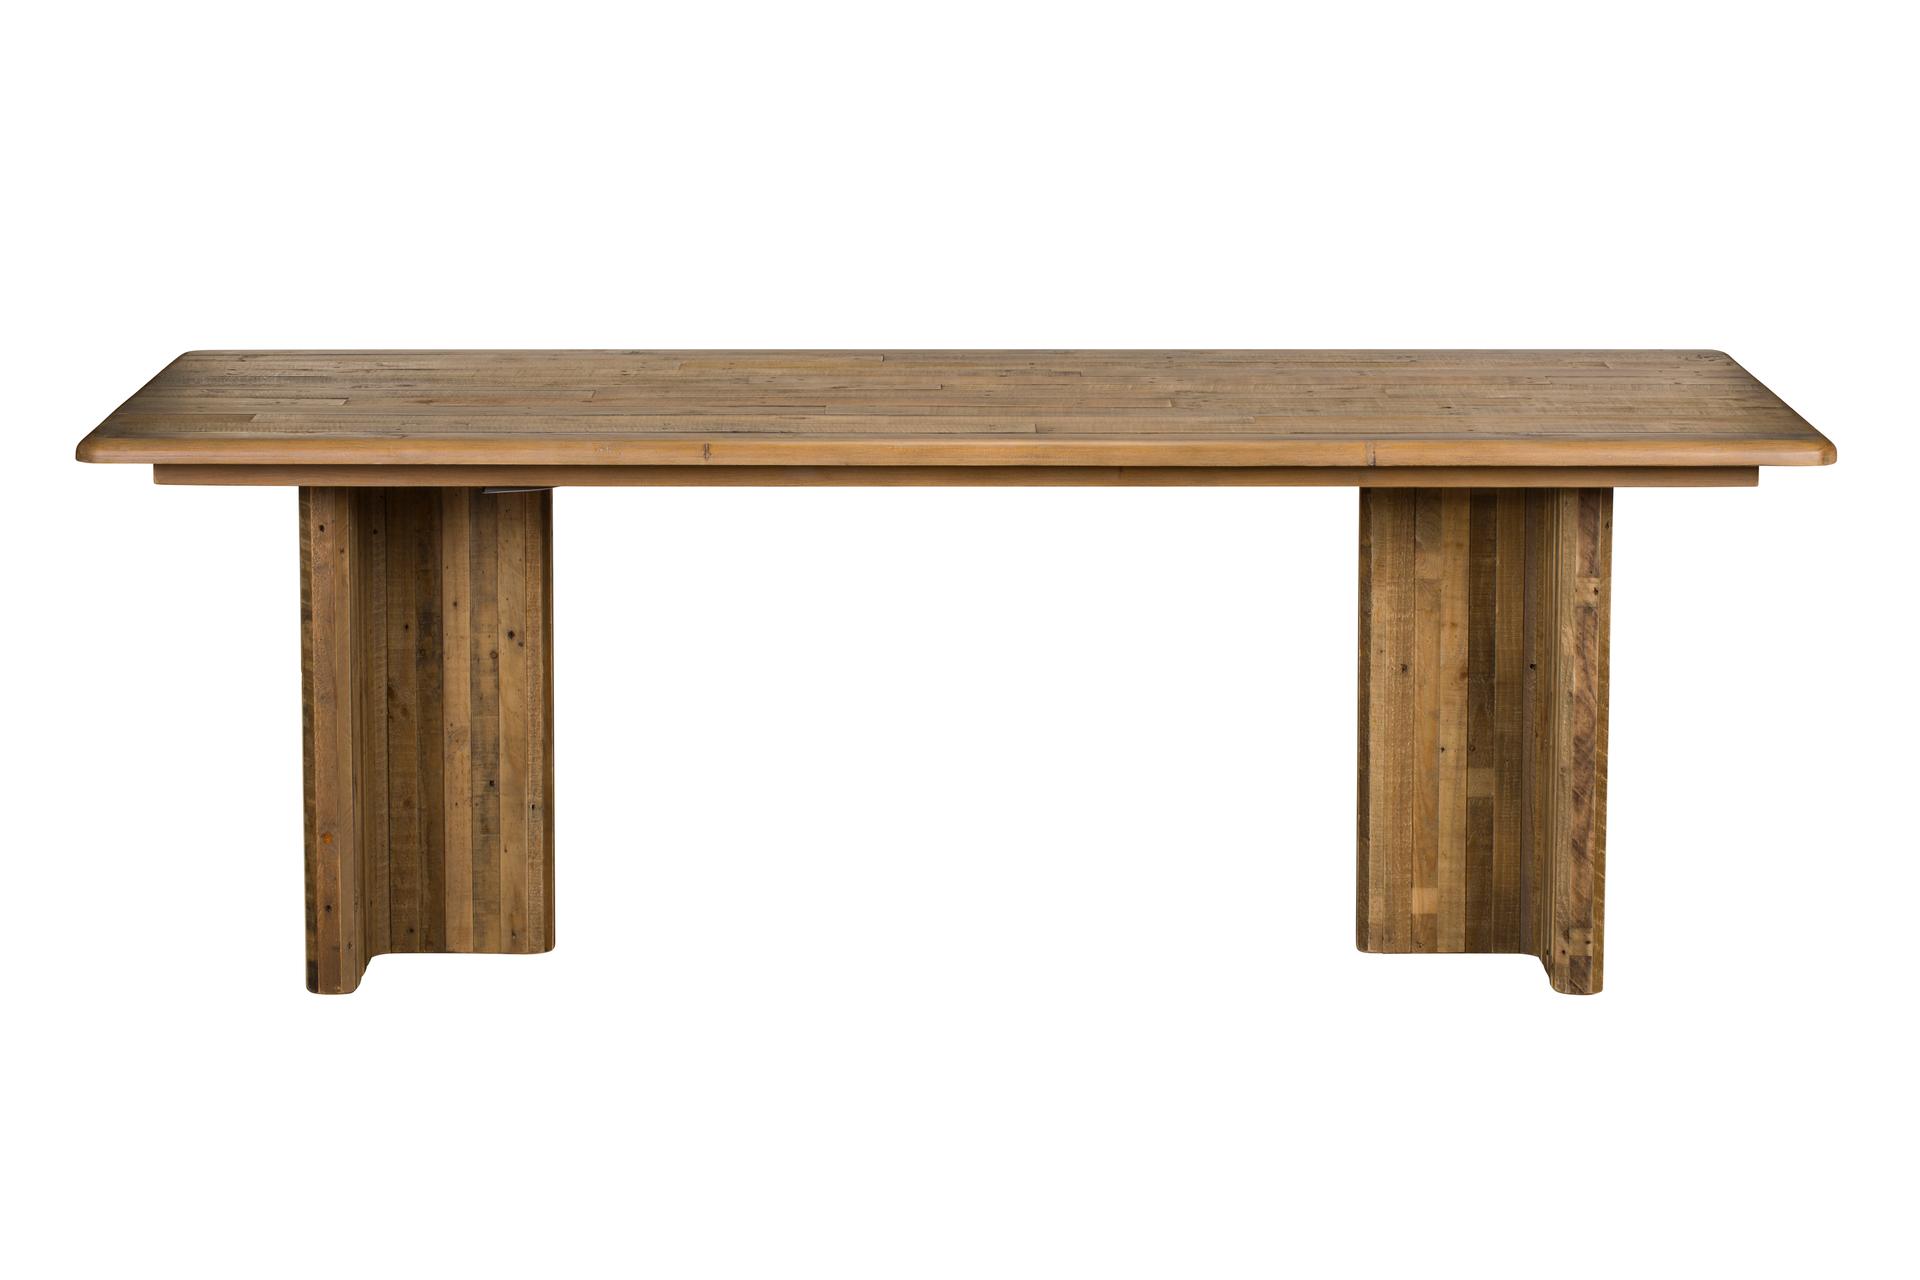 Turin 220cm Dining Table